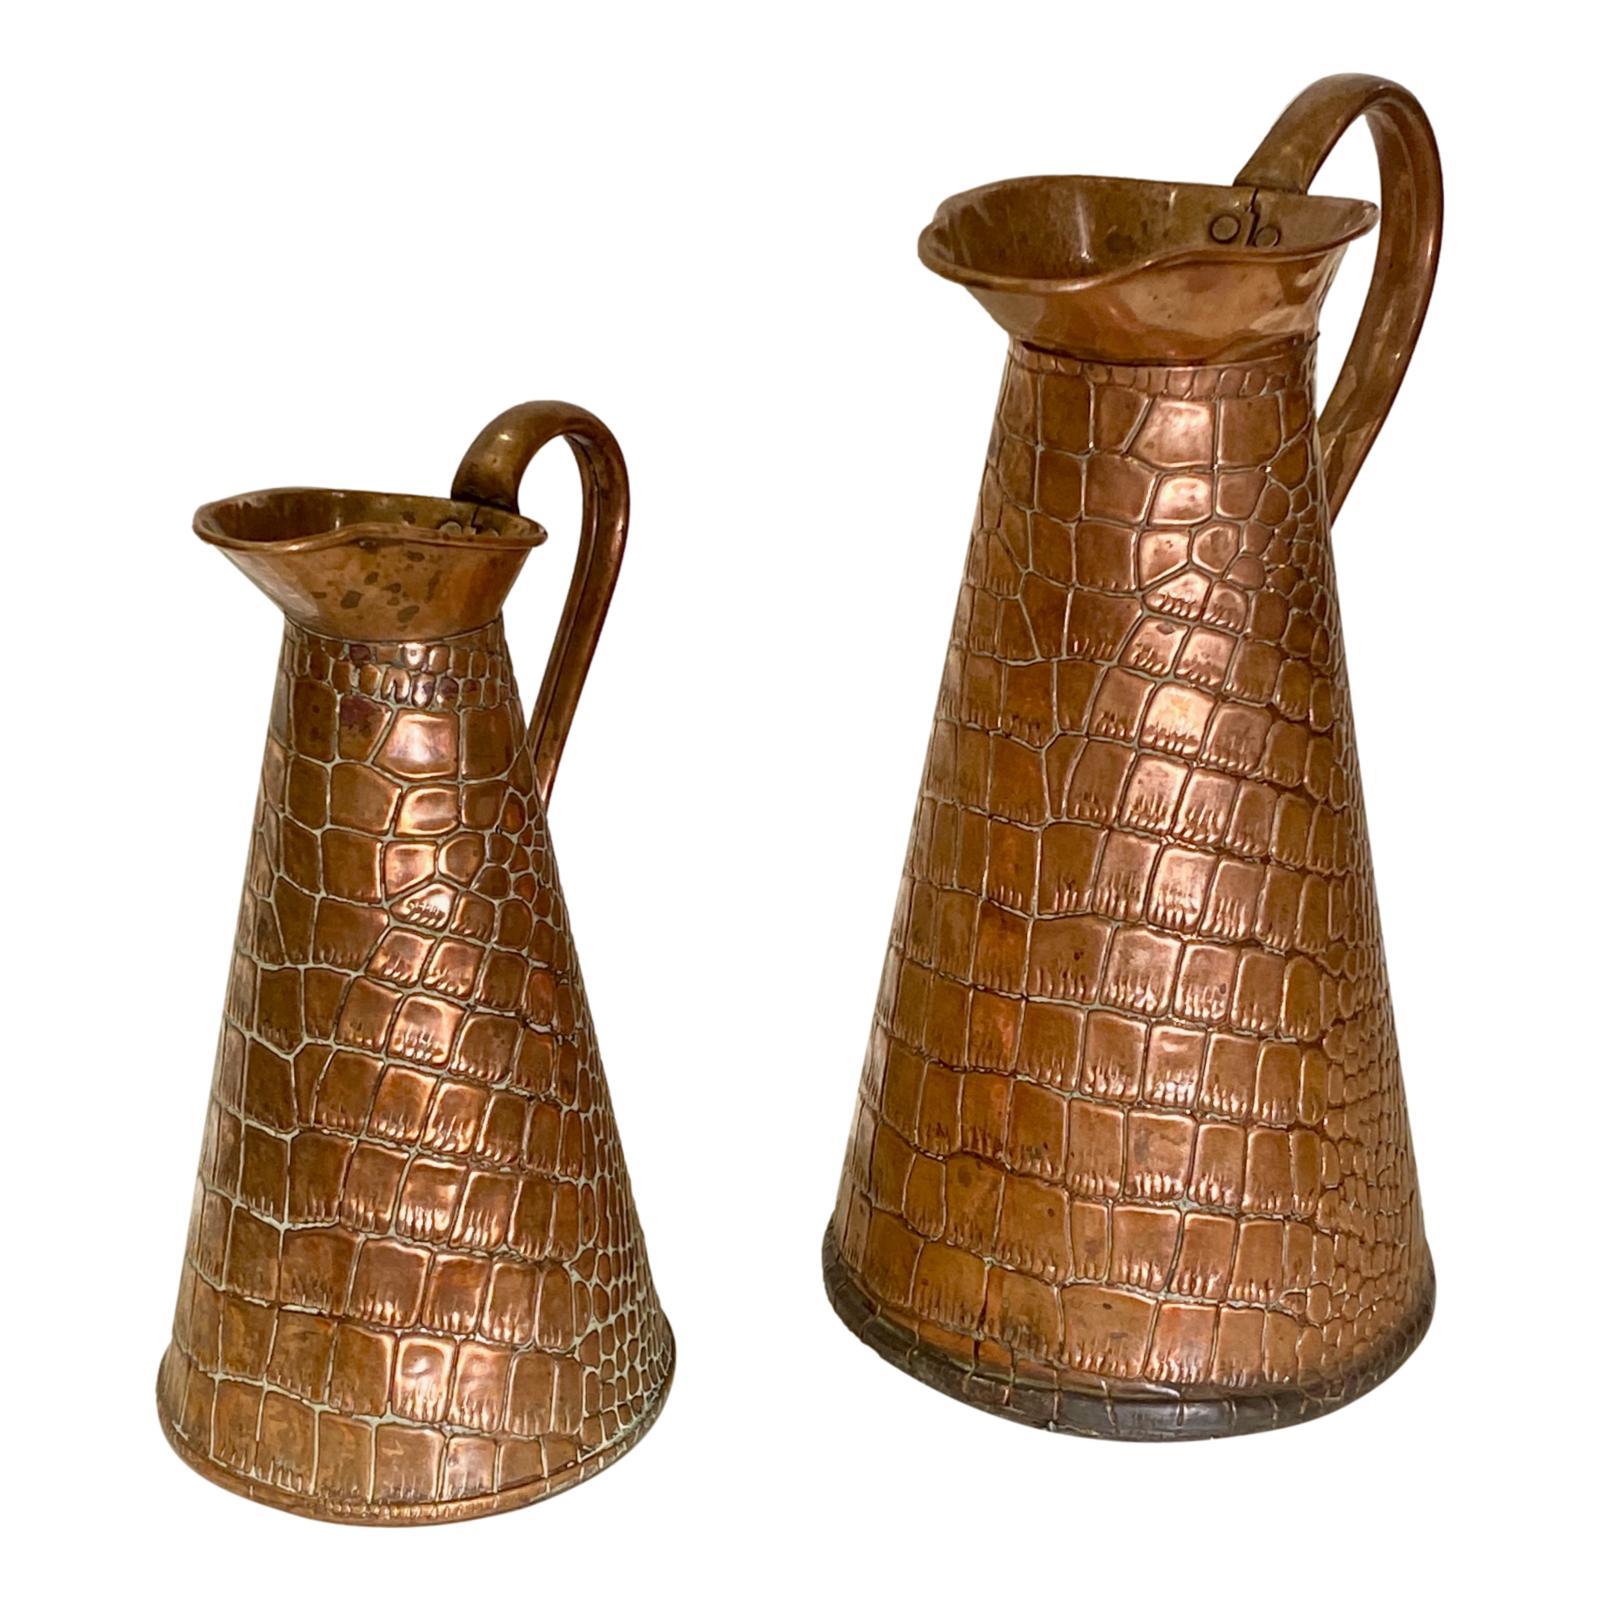 A pair of 1920's English copper jugs with crocodile skin pattern on the body and original patina.

Measurements:
Larger - Height: 13